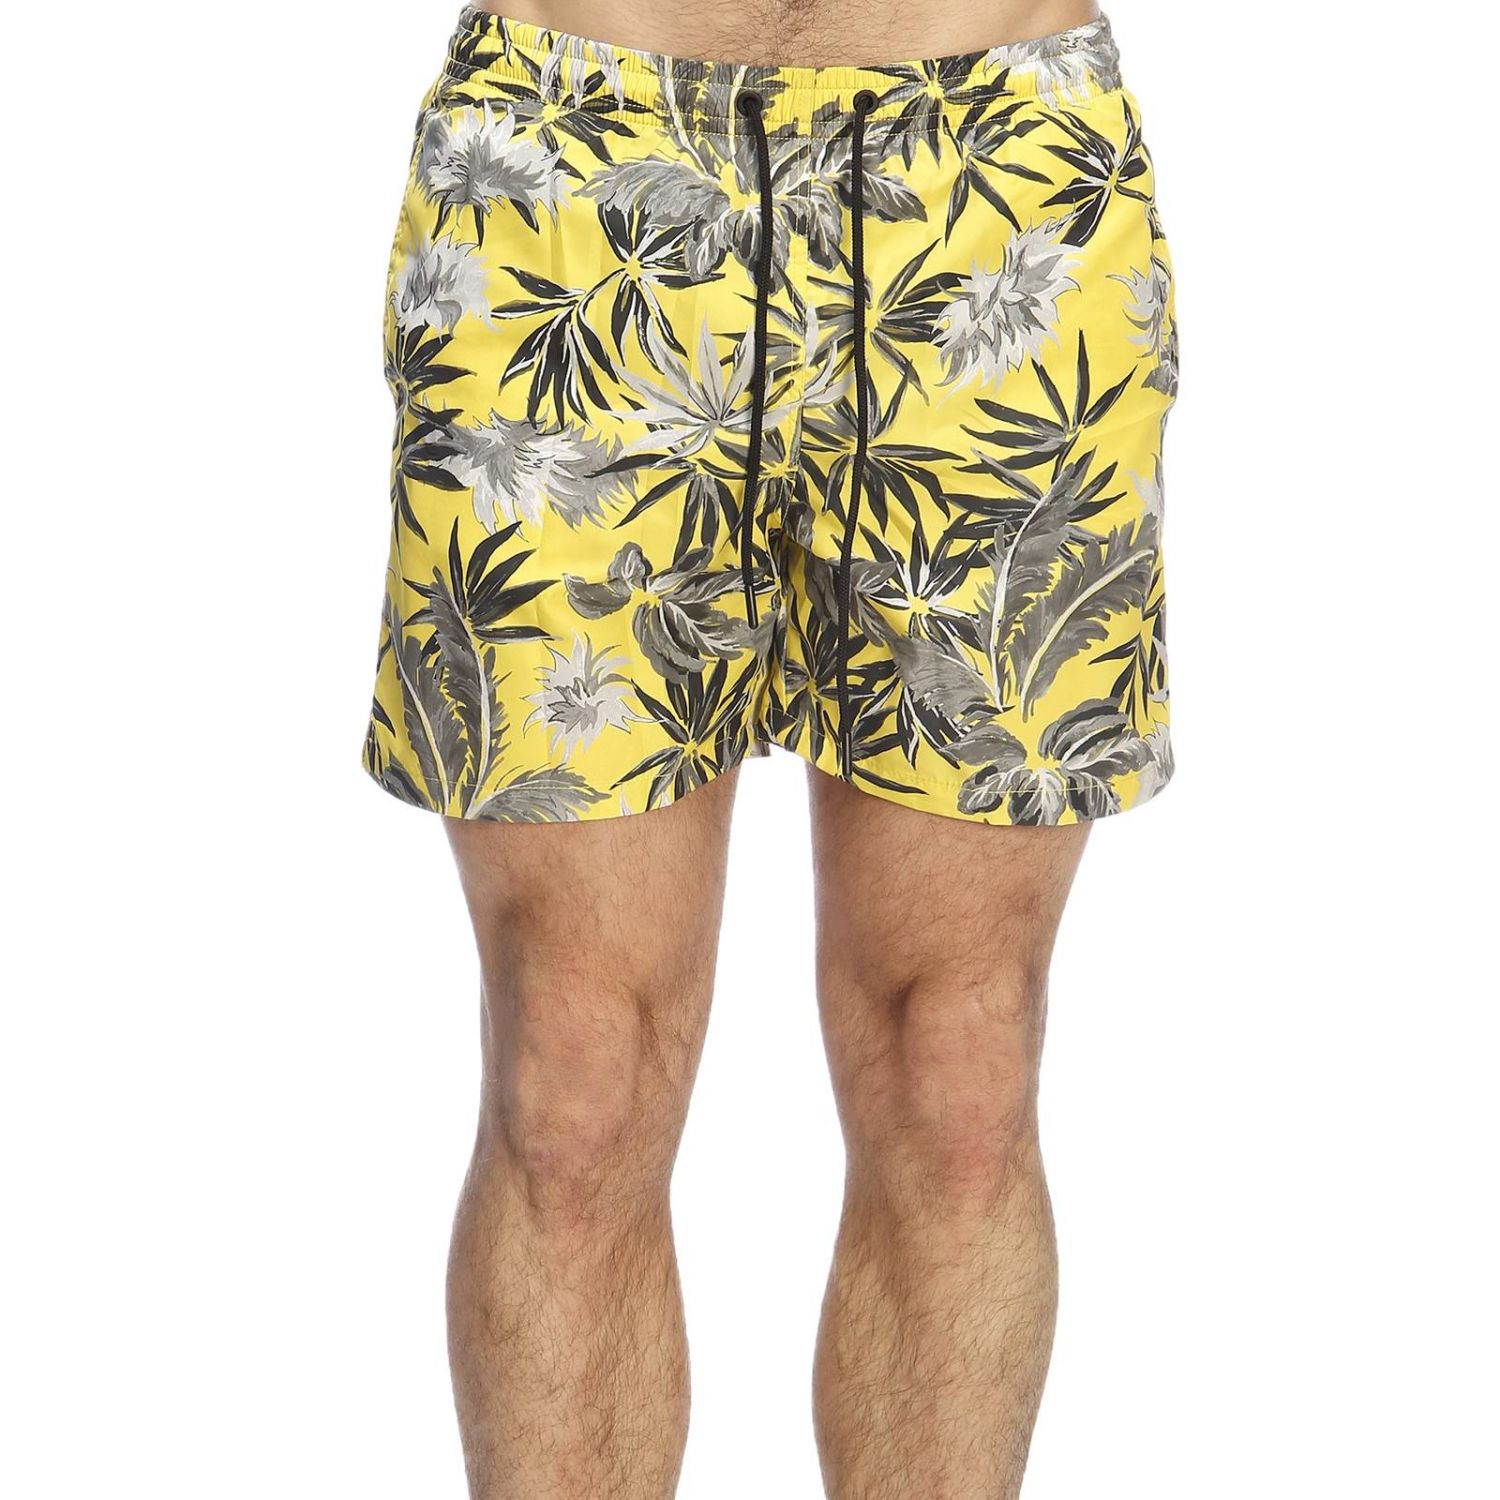 Paolo Pecora Outlet: swimsuit for men - Yellow | Paolo Pecora swimsuit ...